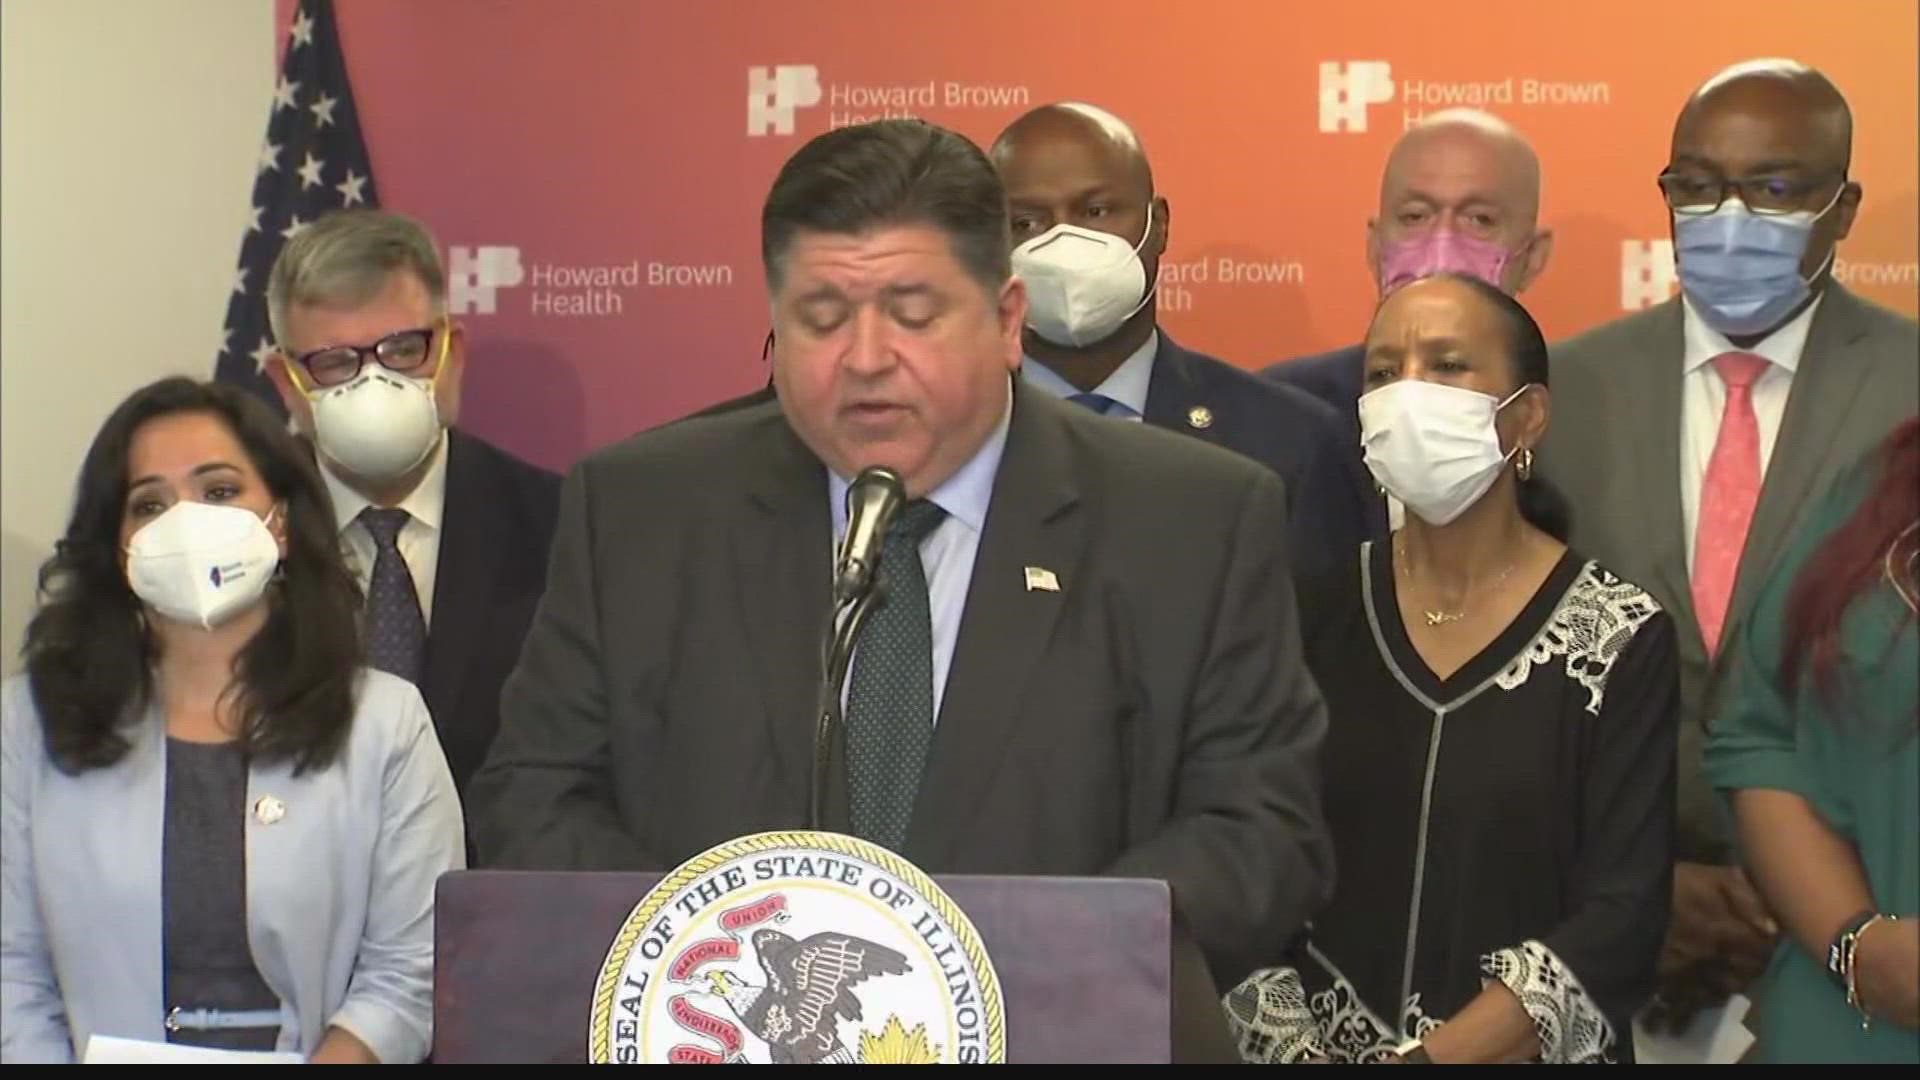 Illinois Gov. JB Pritzker vowed to protect and expand abortion rights. He's calling for a special legislative session in the coming weeks.